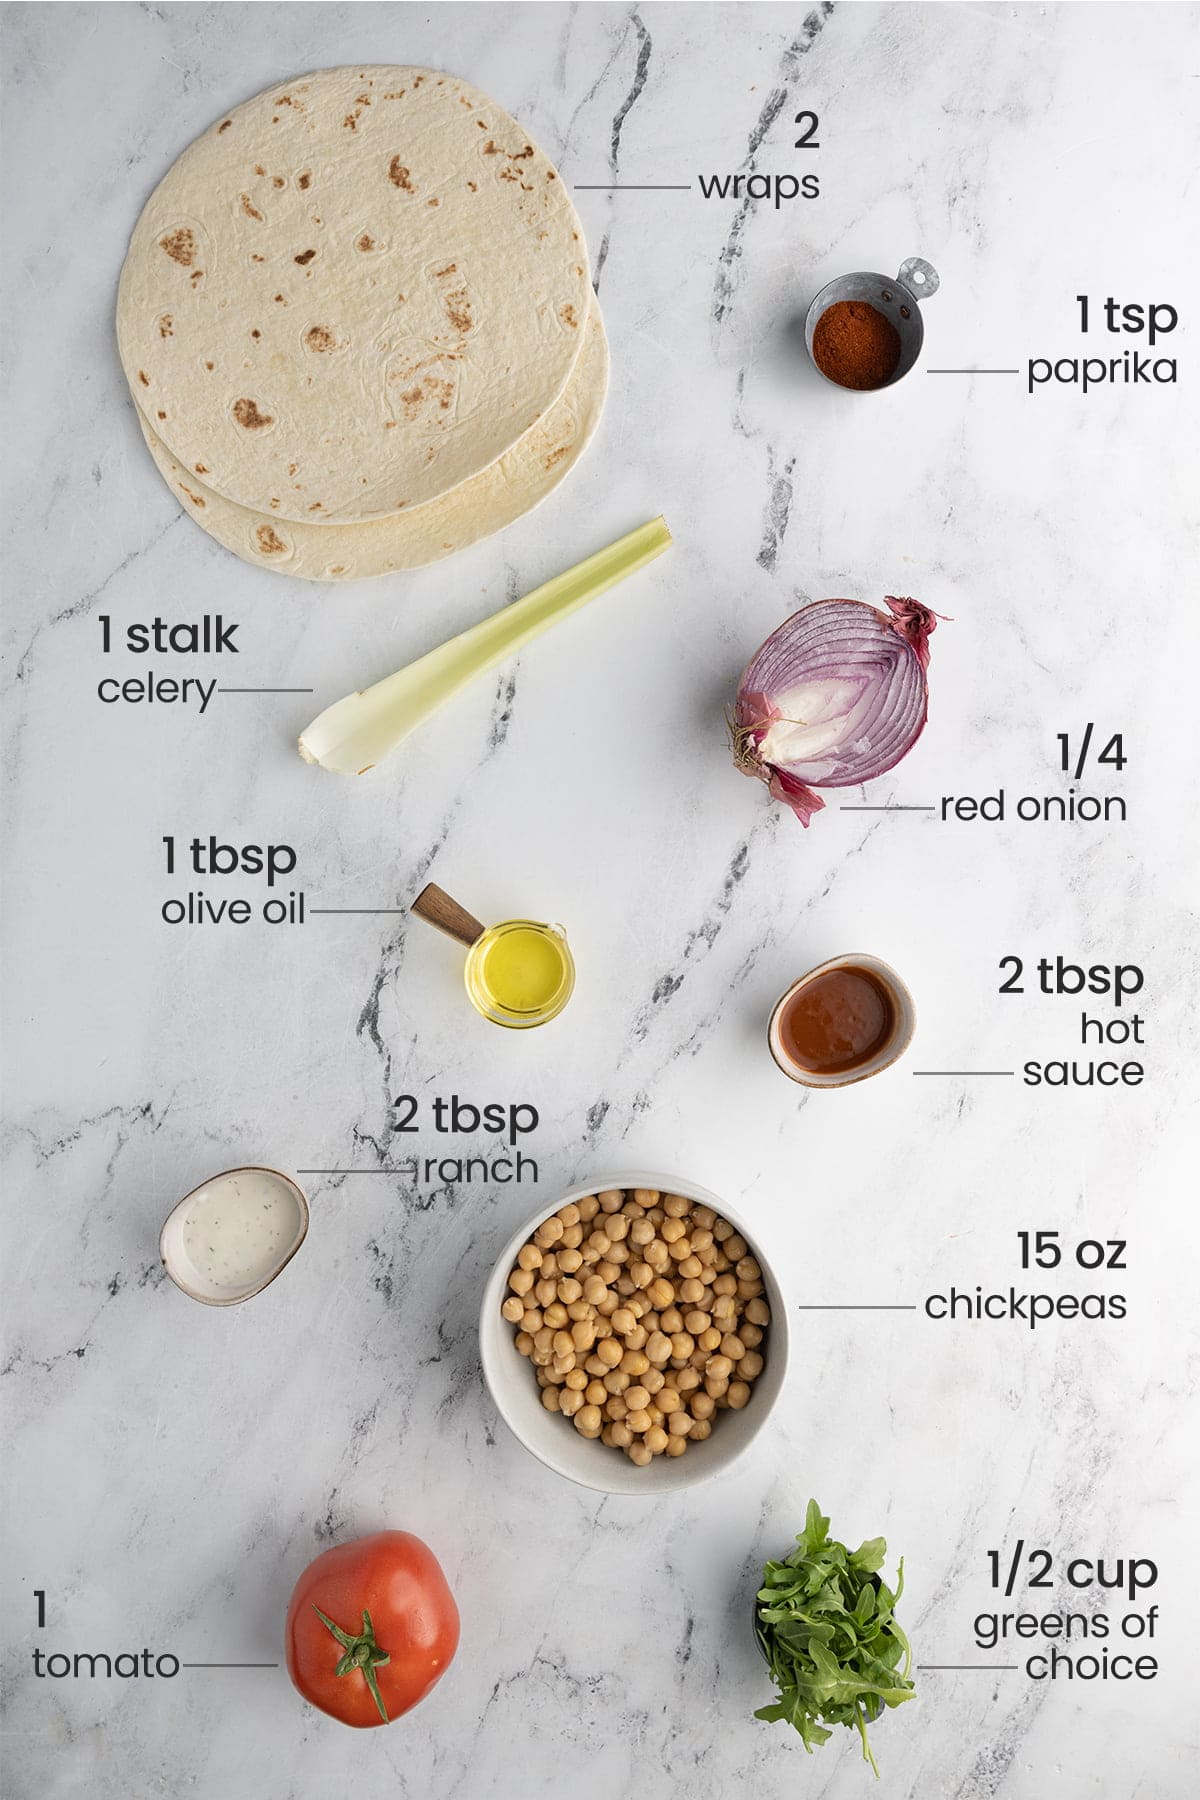 overhead view of all ingredients for buffalo chickpea wrap - wraos, paprika, celery, red onion, olive oil, hot sauce, ranch, chickpeas, tomato, greens